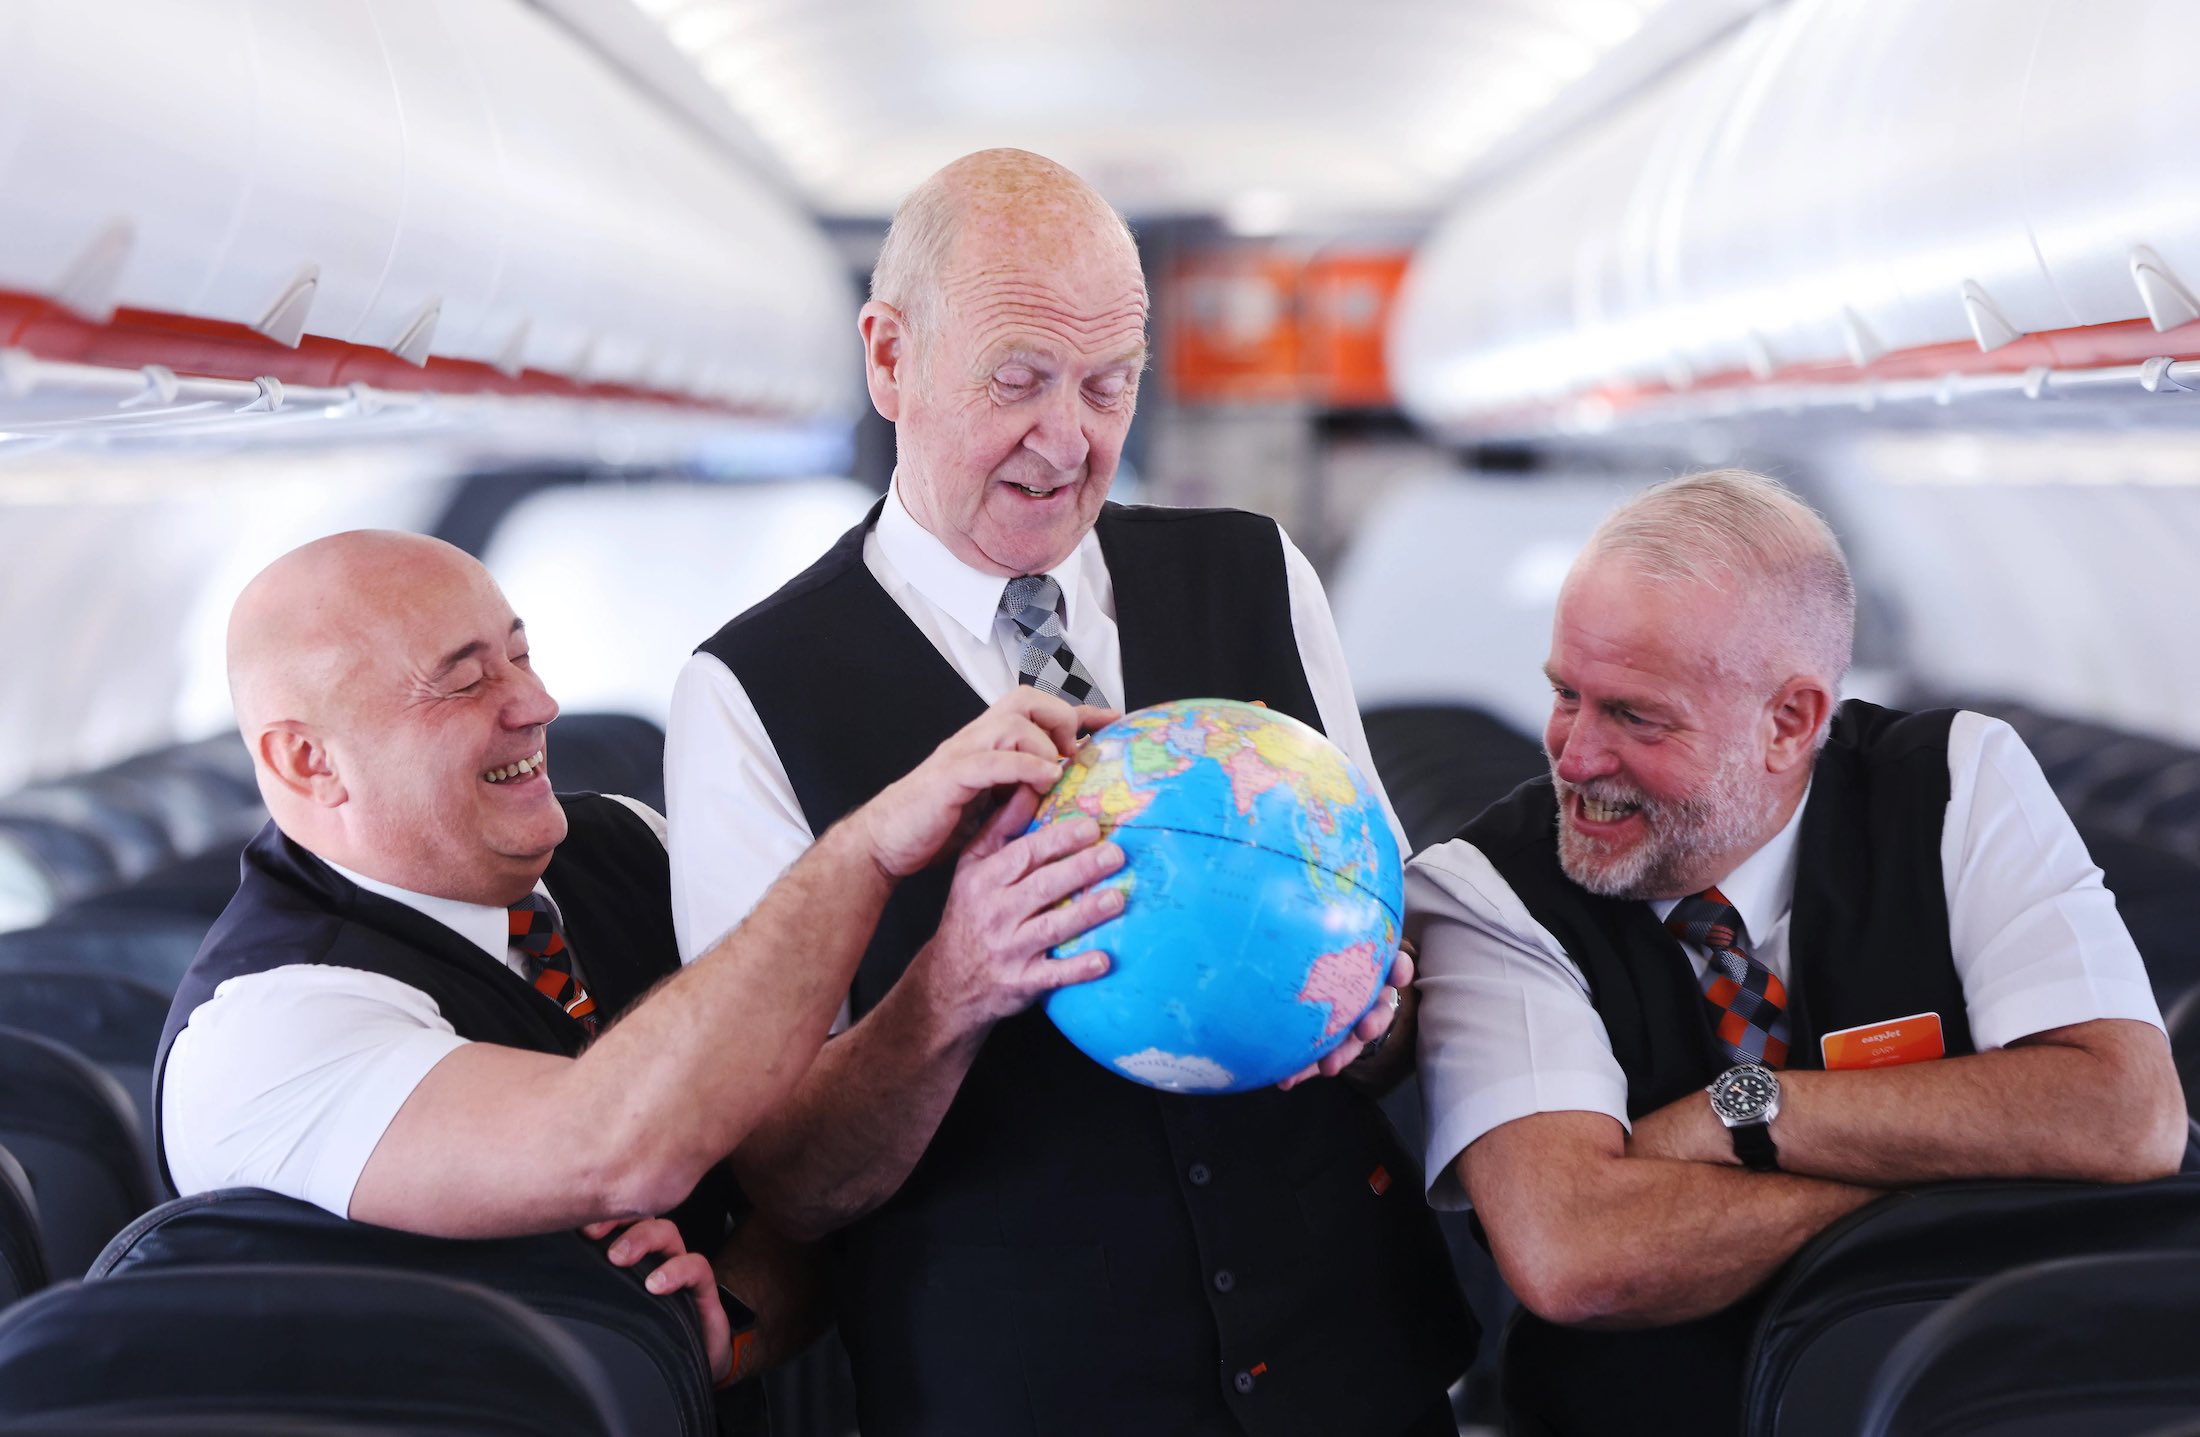 Airline Is Recruiting Senior Citizens To Be Flight Attendants